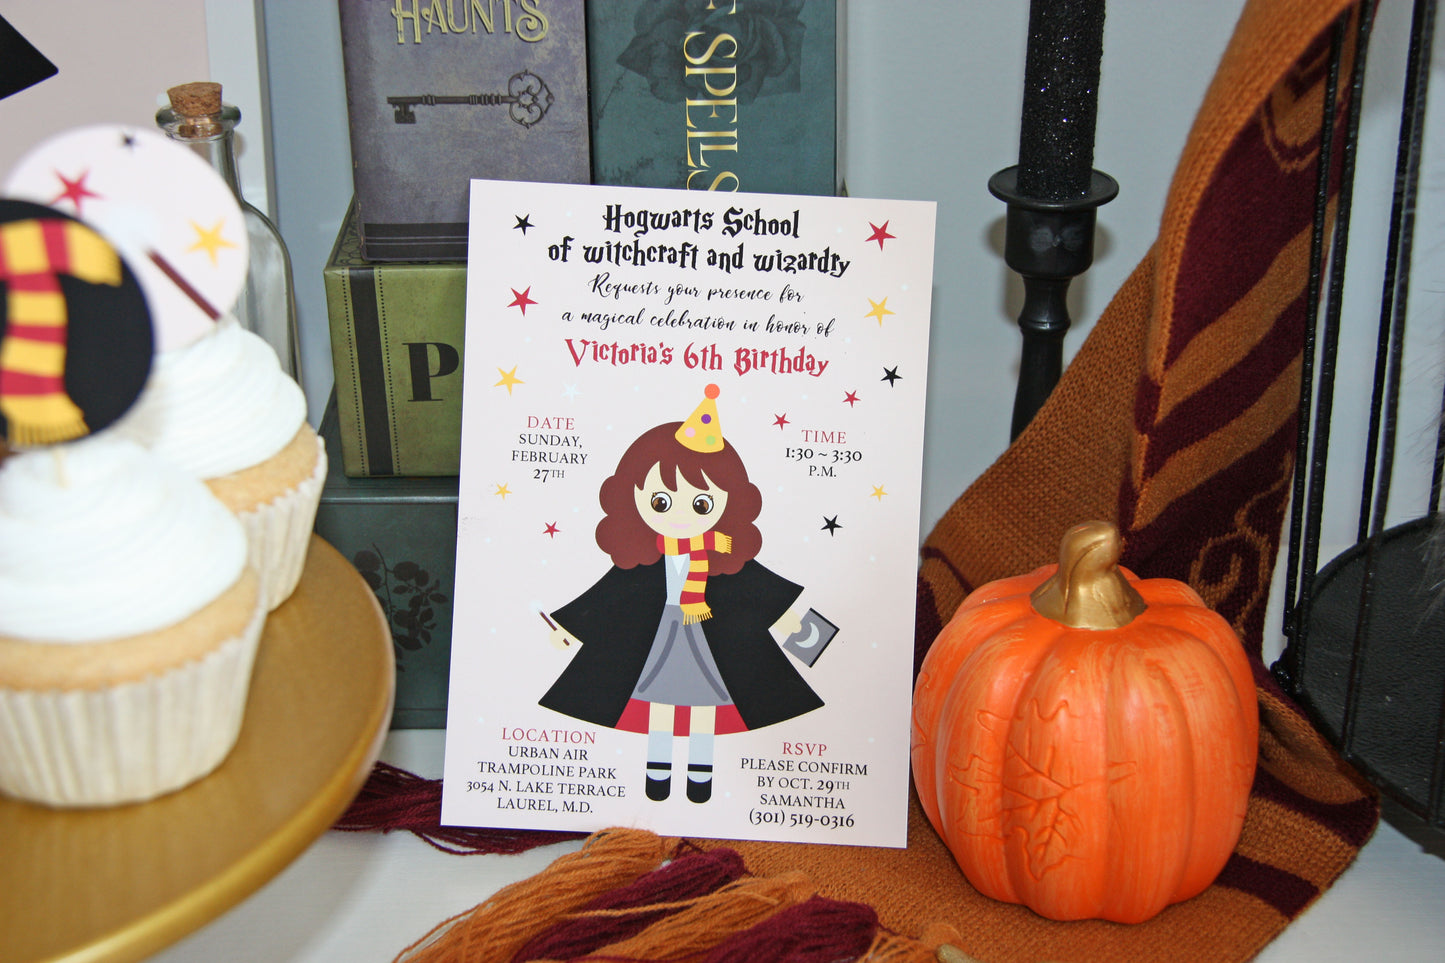 Magical printable party kit